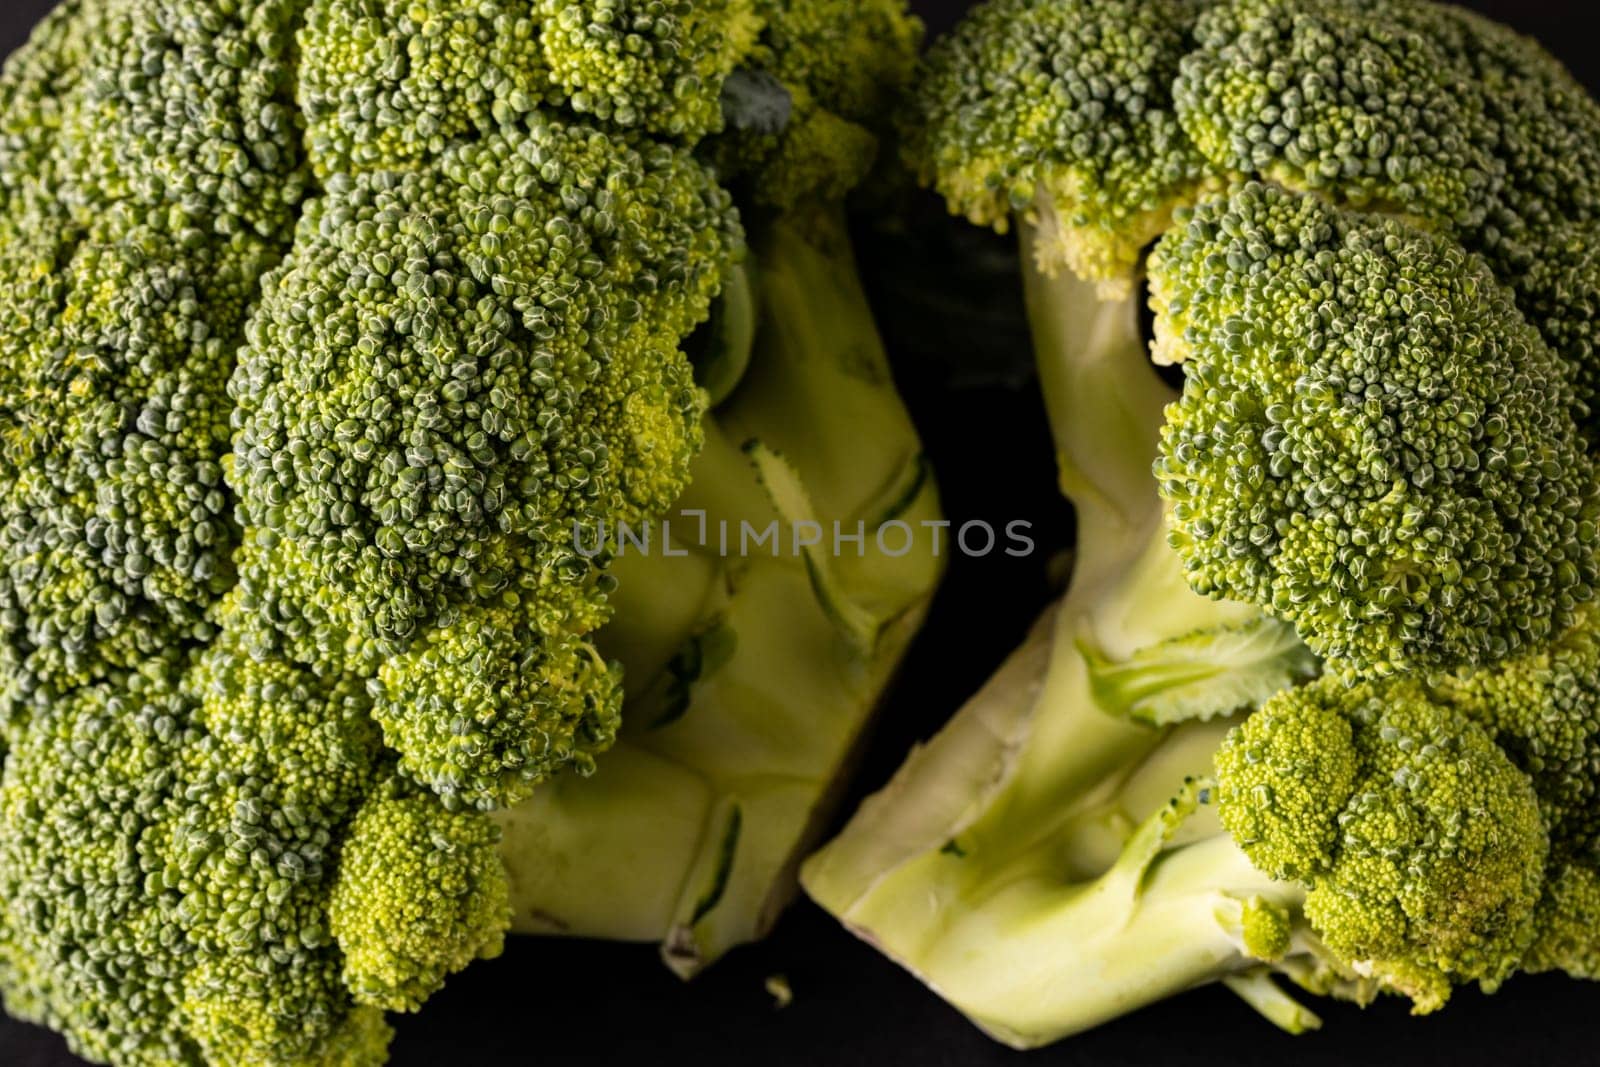 Extreme close-up of fresh green broccolis. unaltered, vegetable, healthy food, raw food and organic concept.